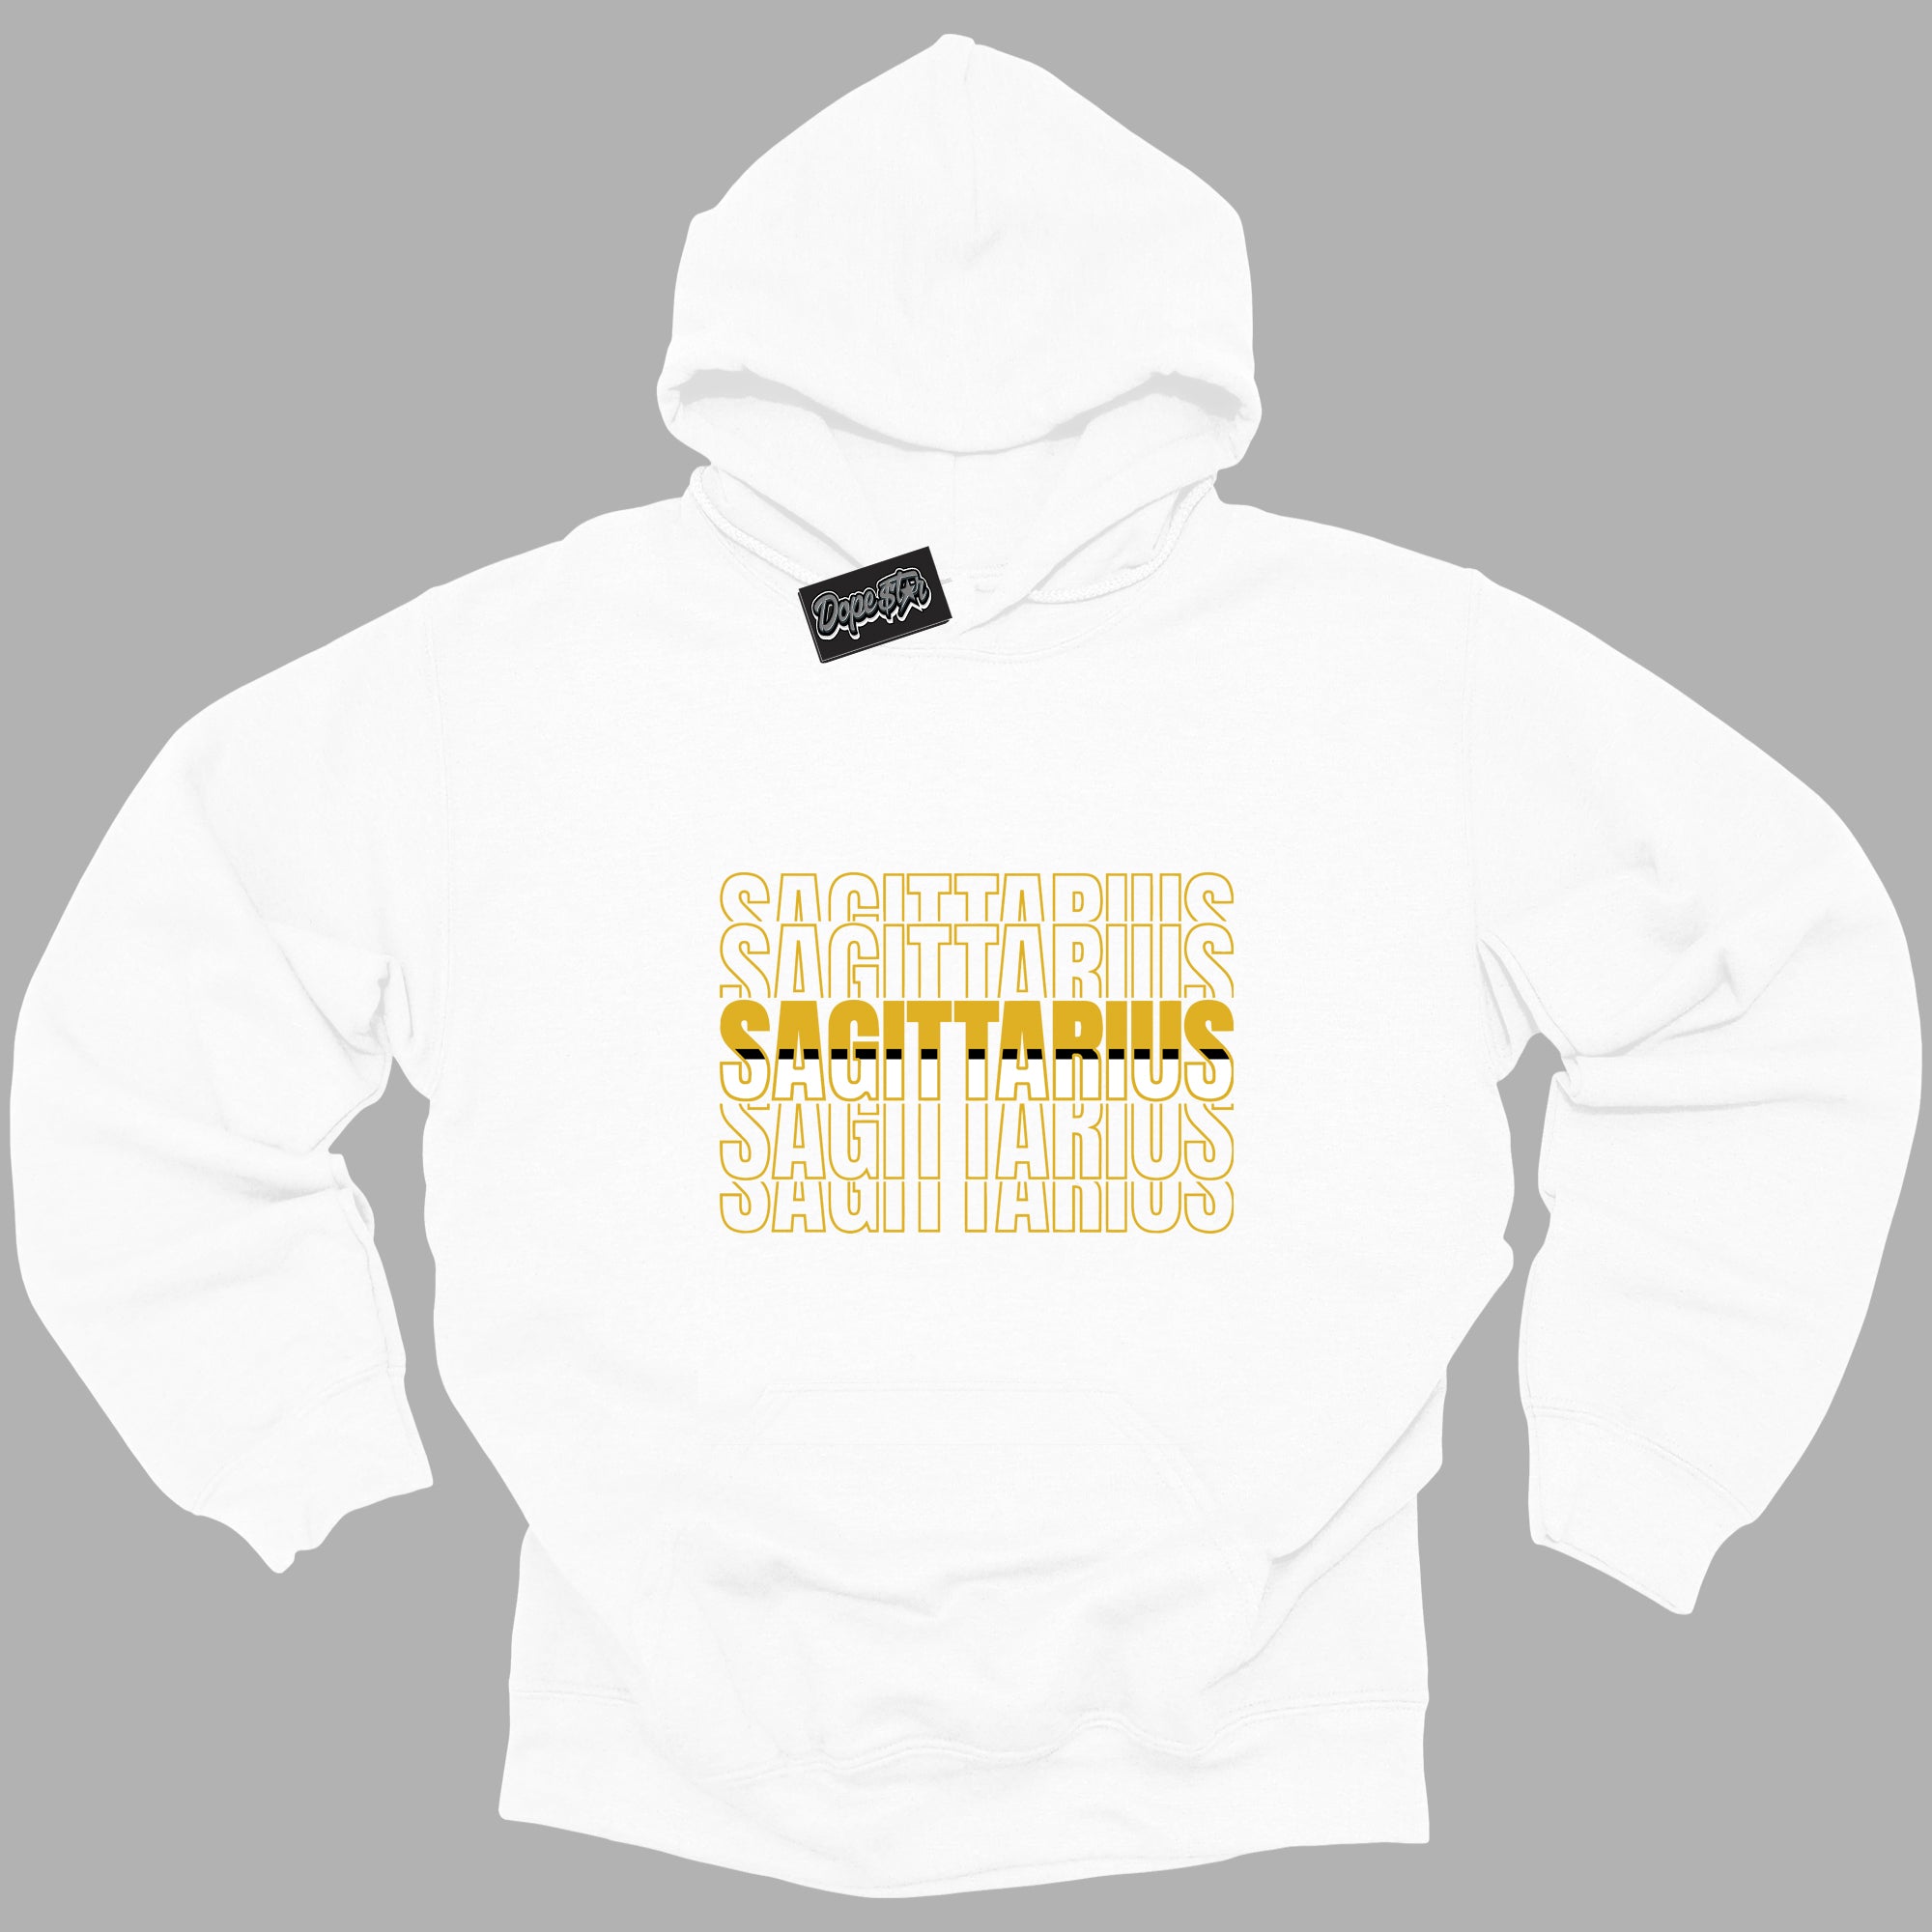 Cool White Hoodie with “ Sagittarius ”  design that Perfectly Matches Yellow Ochre 6s Sneakers.